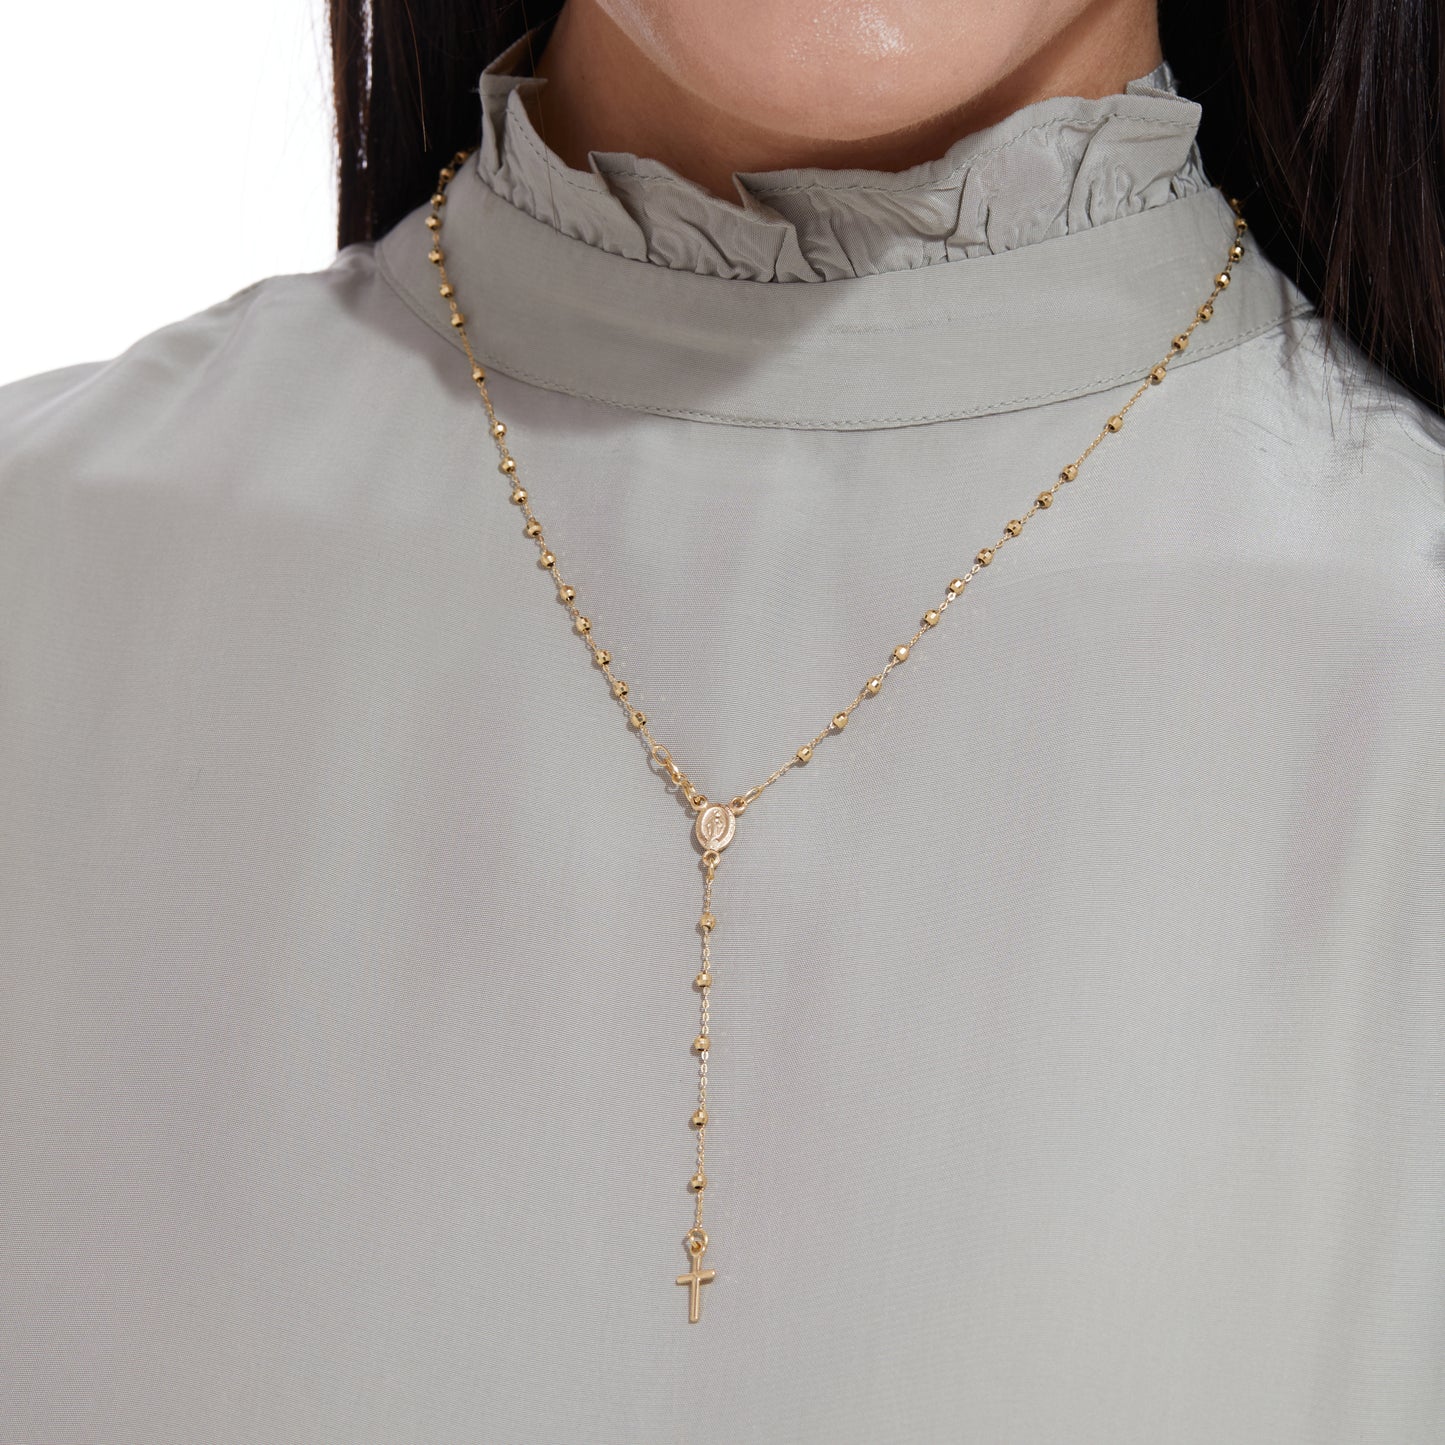 TRADITIONAL FACETED YELLOW GOLD ROSARY